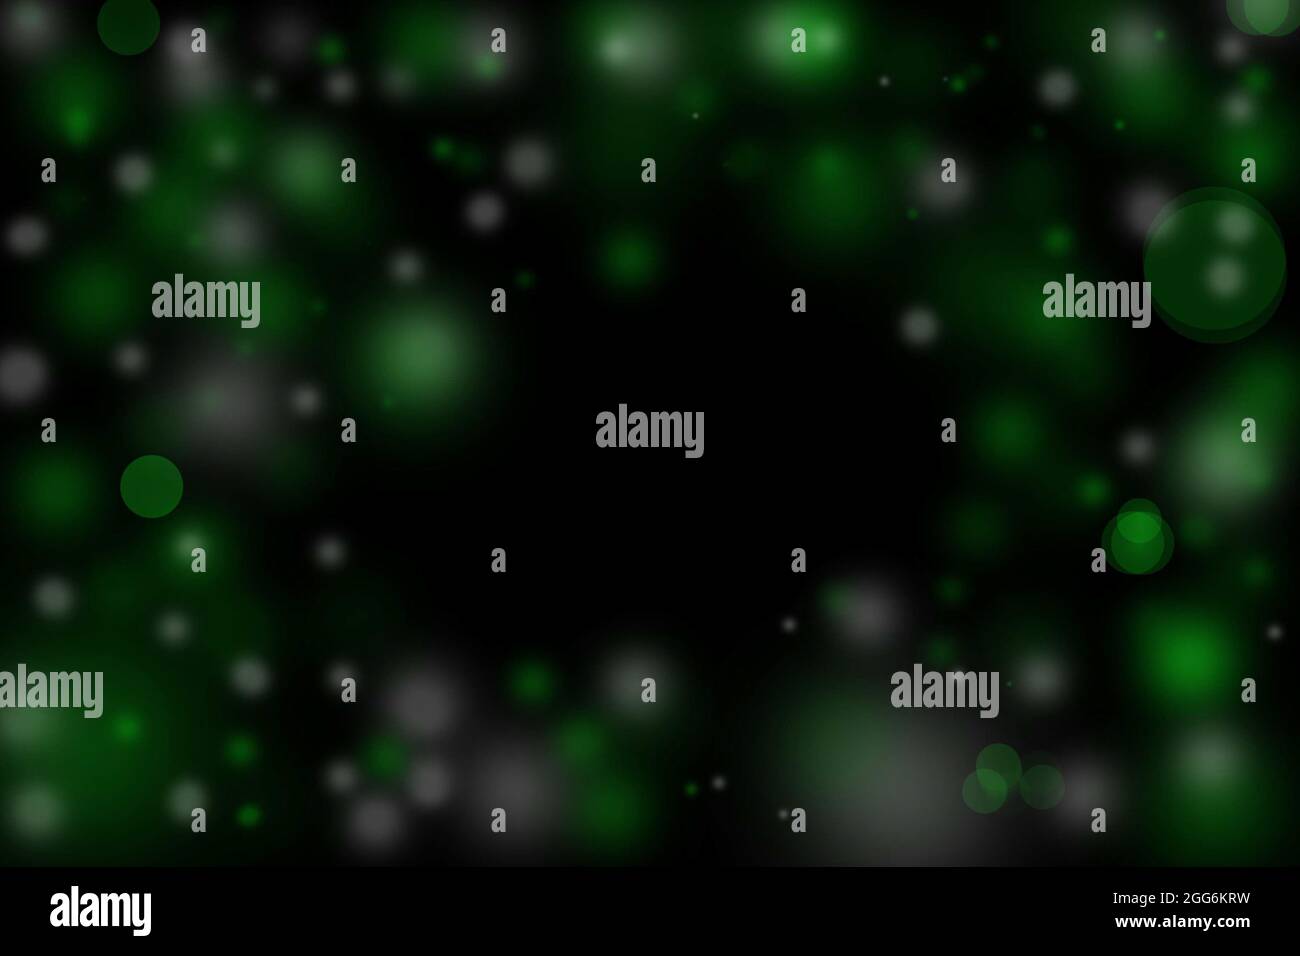 This is a green, black, and white Halloween bokeh image to be used as a photograph overlay or digital background. Stock Photo